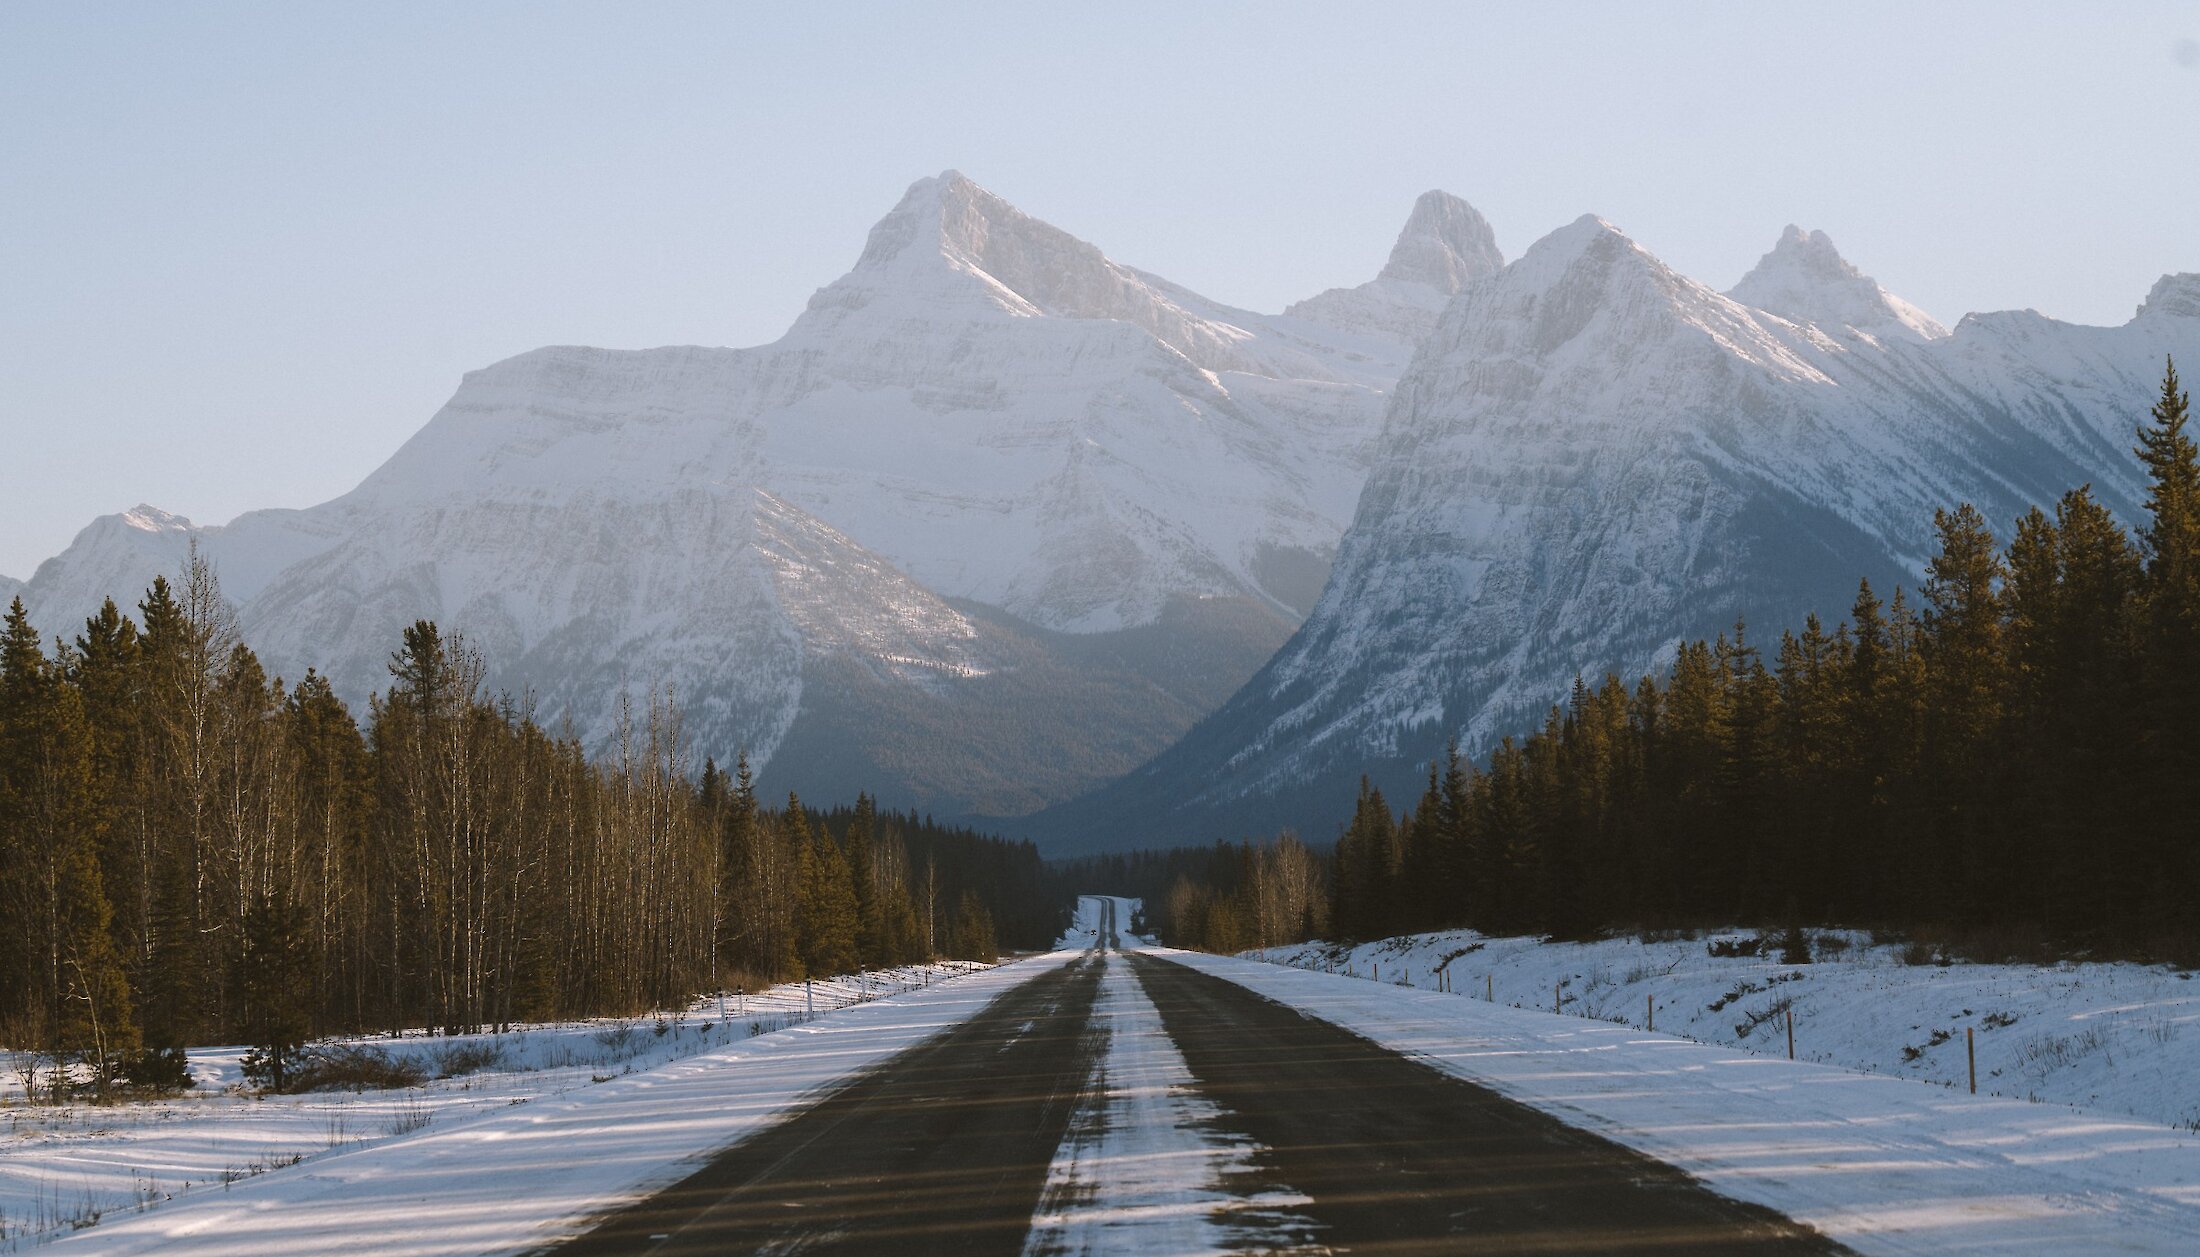 A view of the magnificent mountains on one of the worlds best drives, the Icefield Parkway